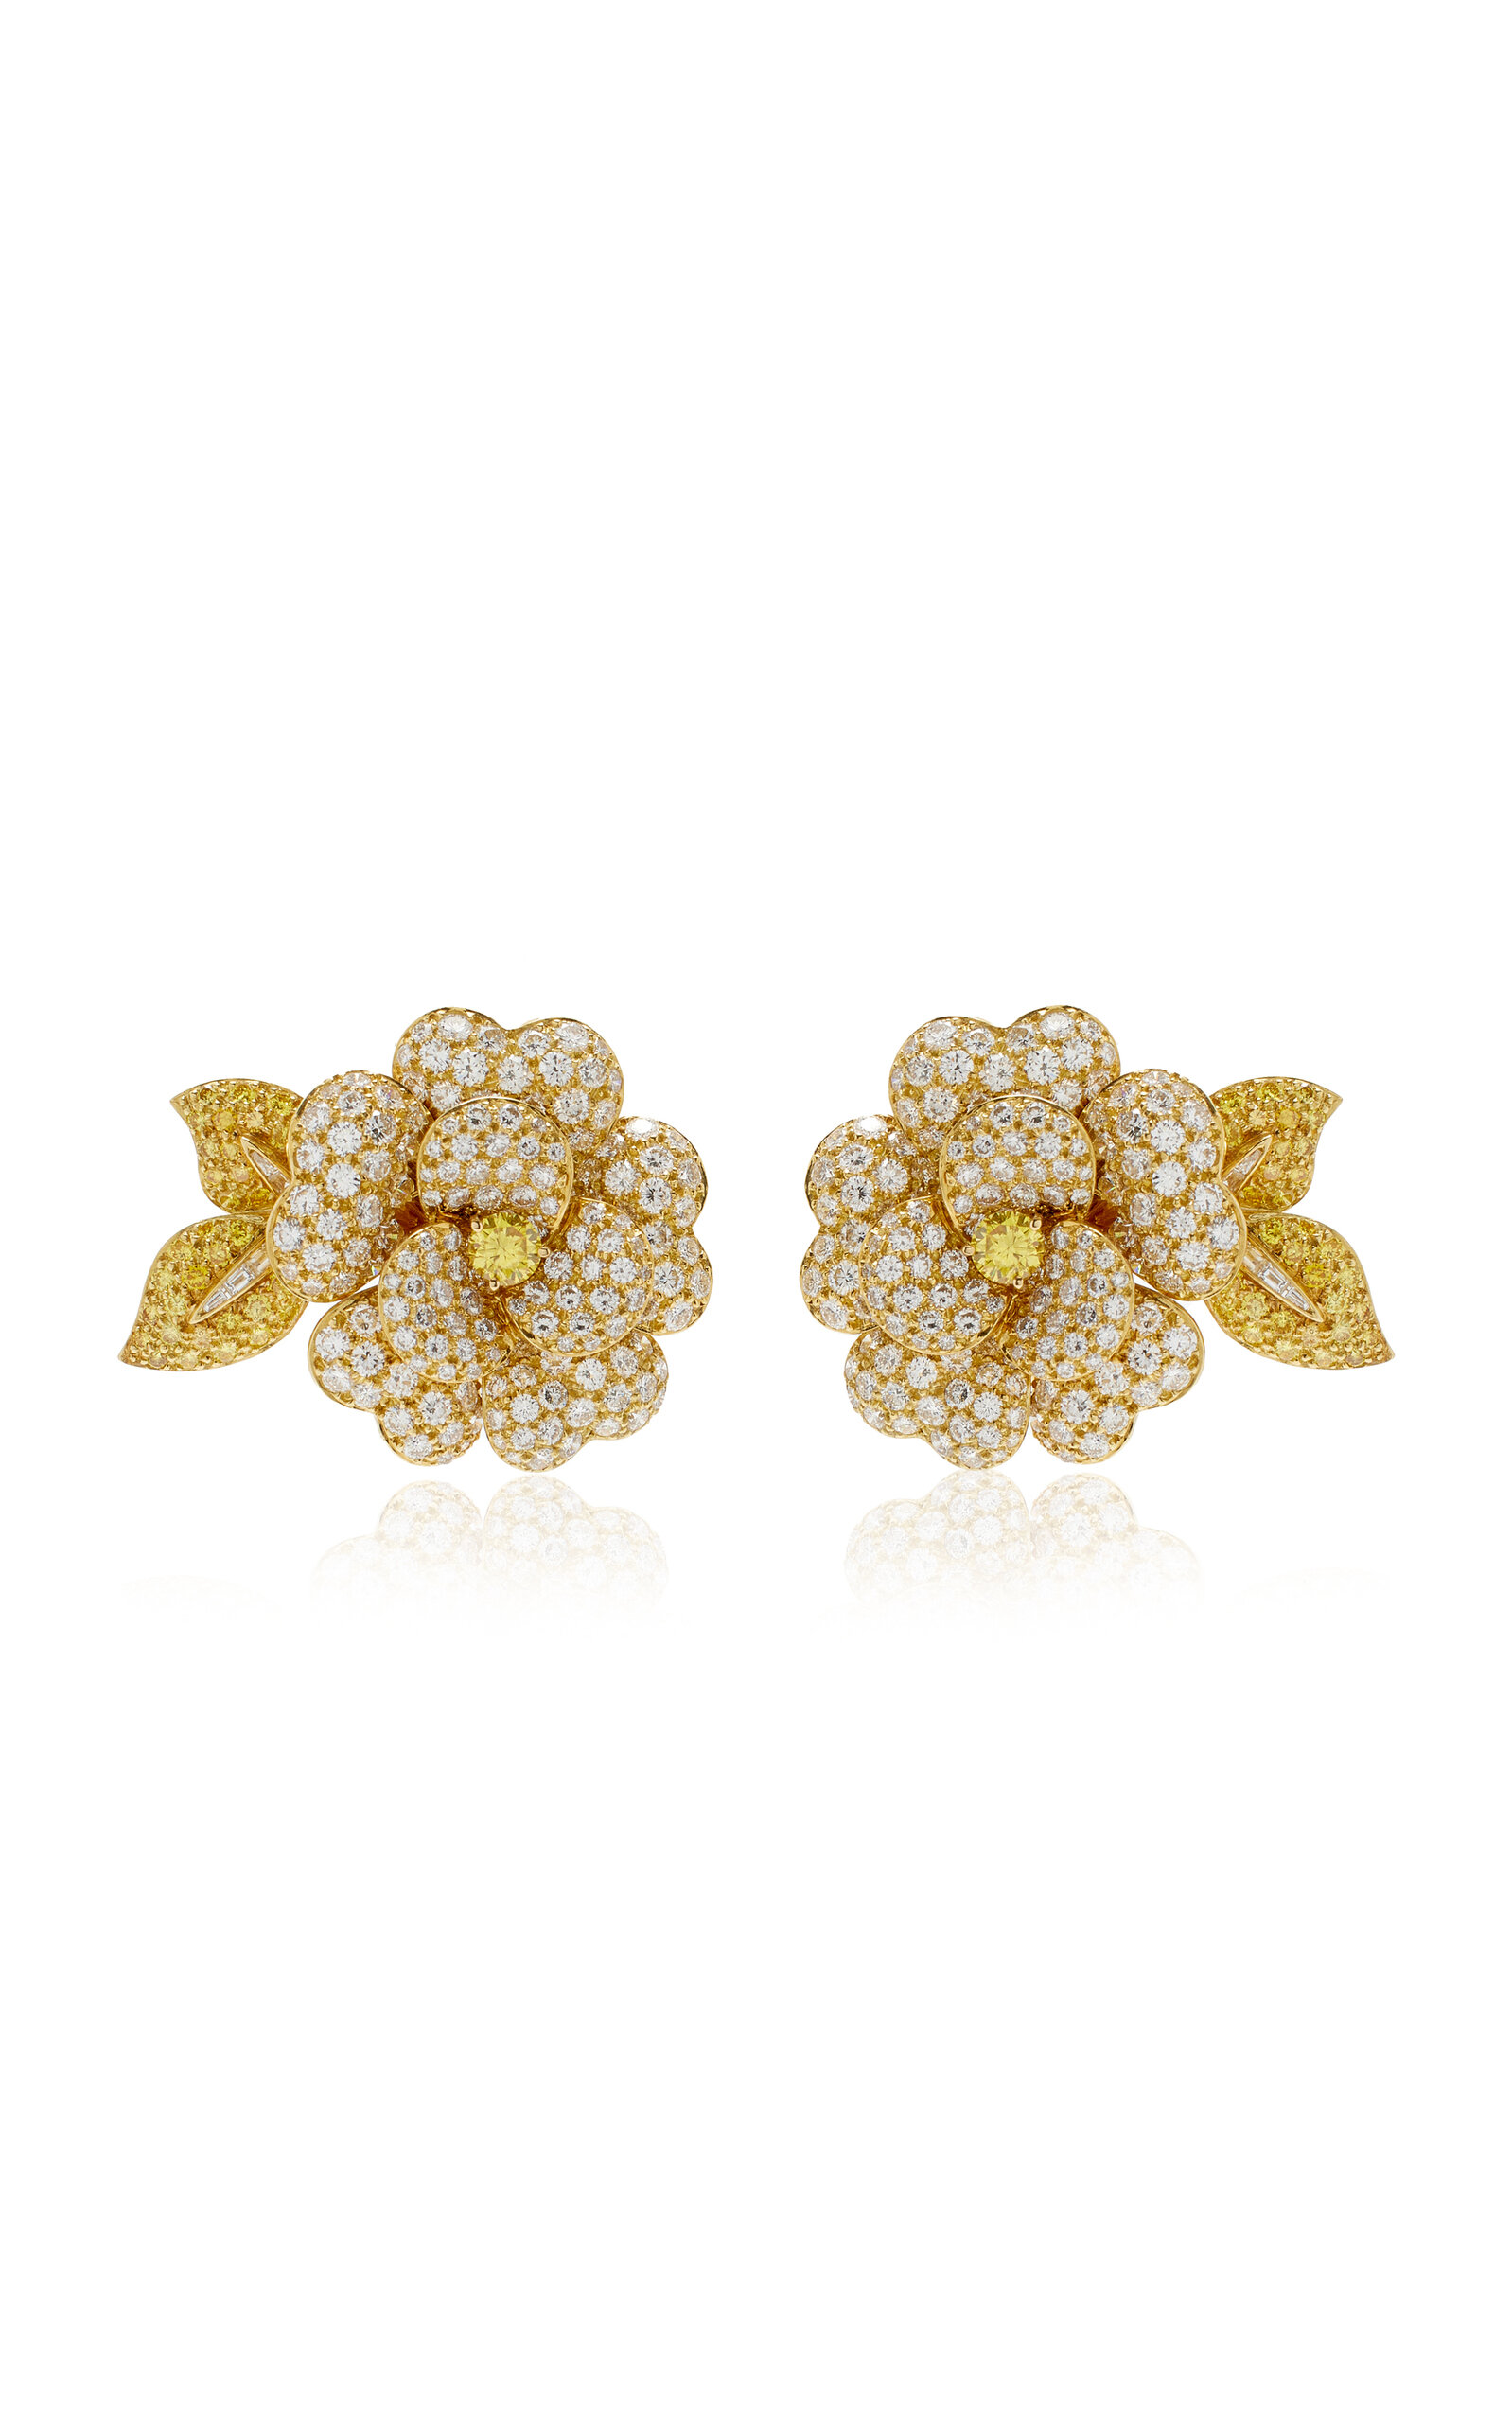 Simon Teakle Fancy Colored And Colorless Diamond Earrings; By Van Cleef & Arpels In Yellow